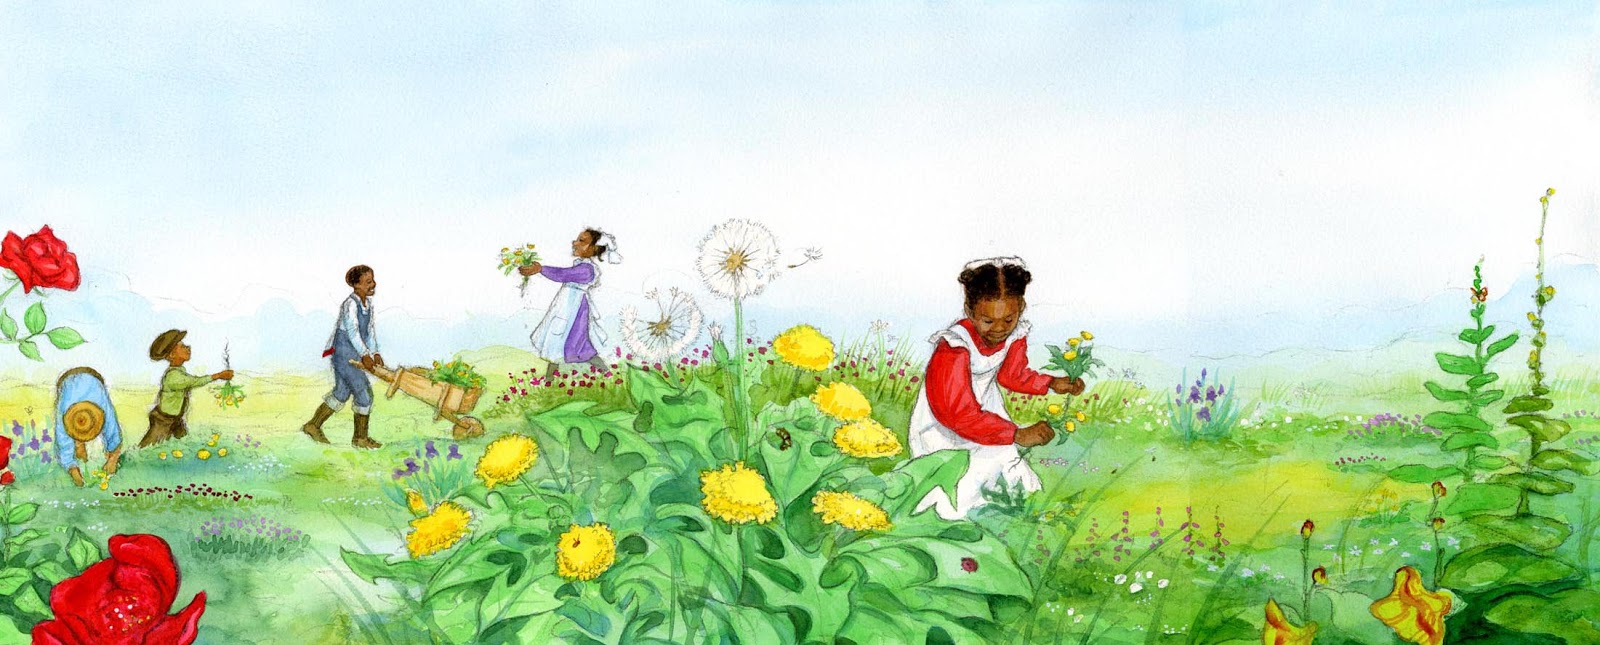 illustration of children playing and planting in garden